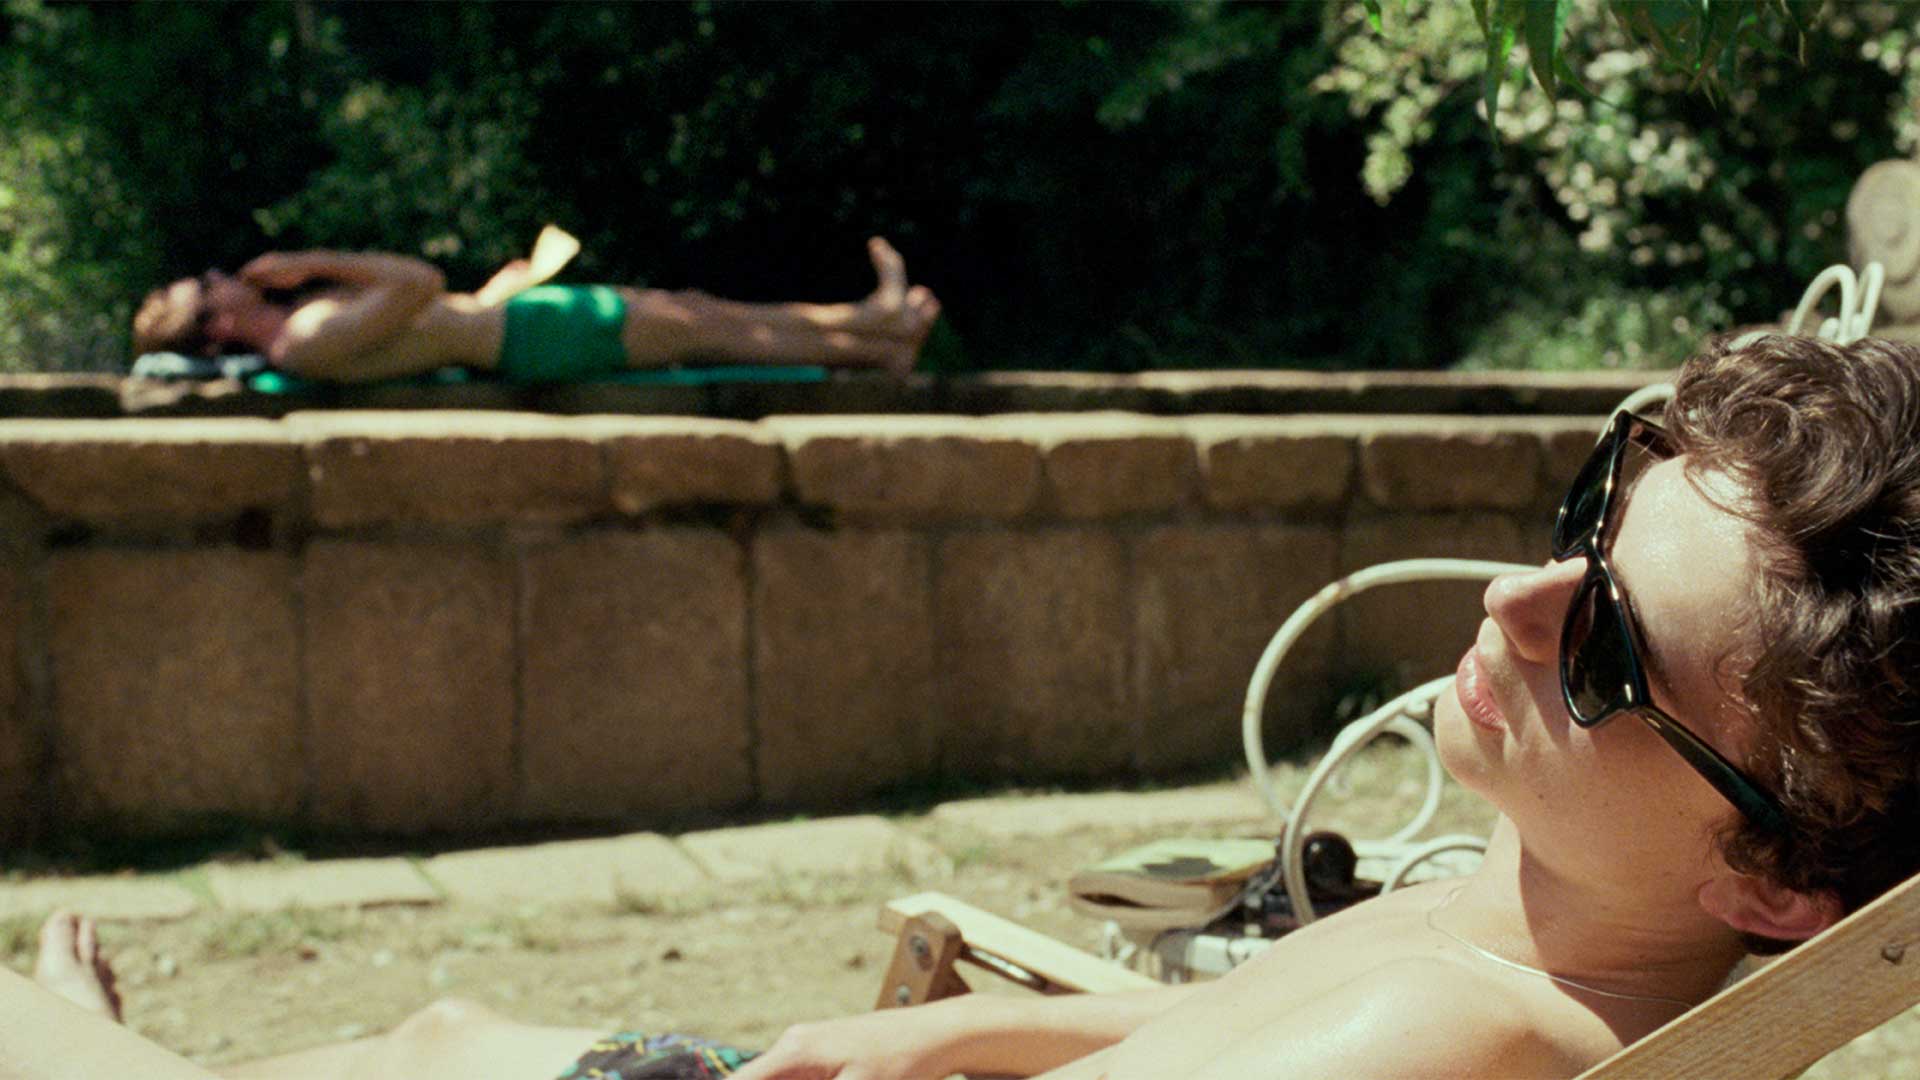 Call Me By Your Name Image - Call Me By Your Name Pool Scene - 1920x1080  Wallpaper 